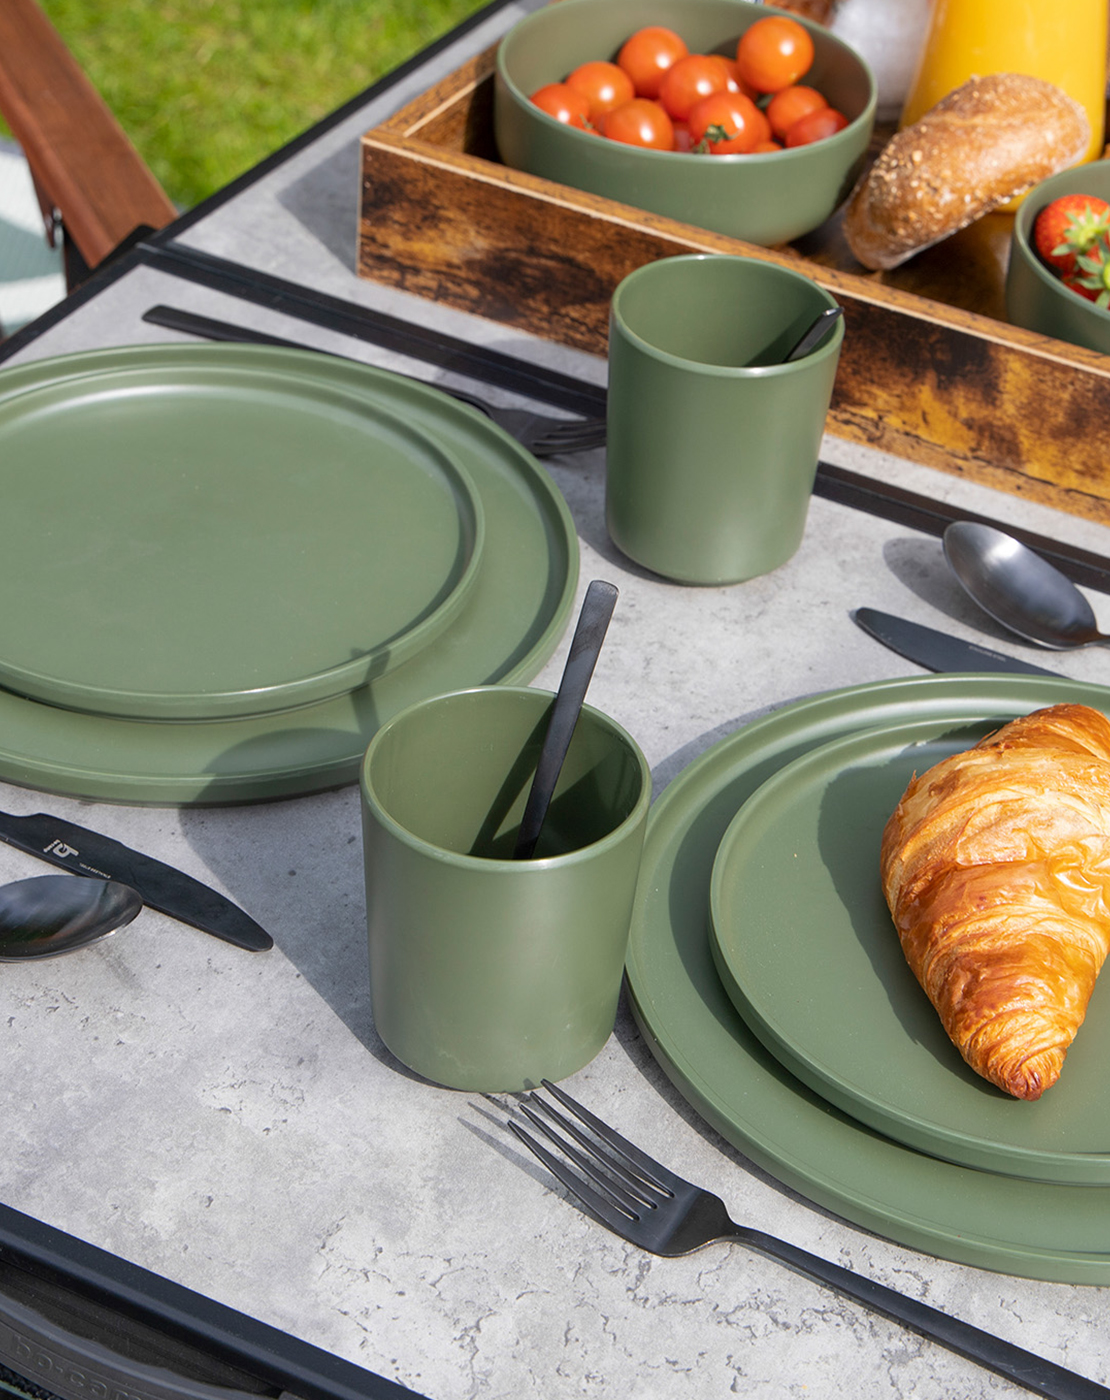 Bo-Camp - Industrial collection - Tableware - Patom - Melamine - 16 Pieces - Green detail 5